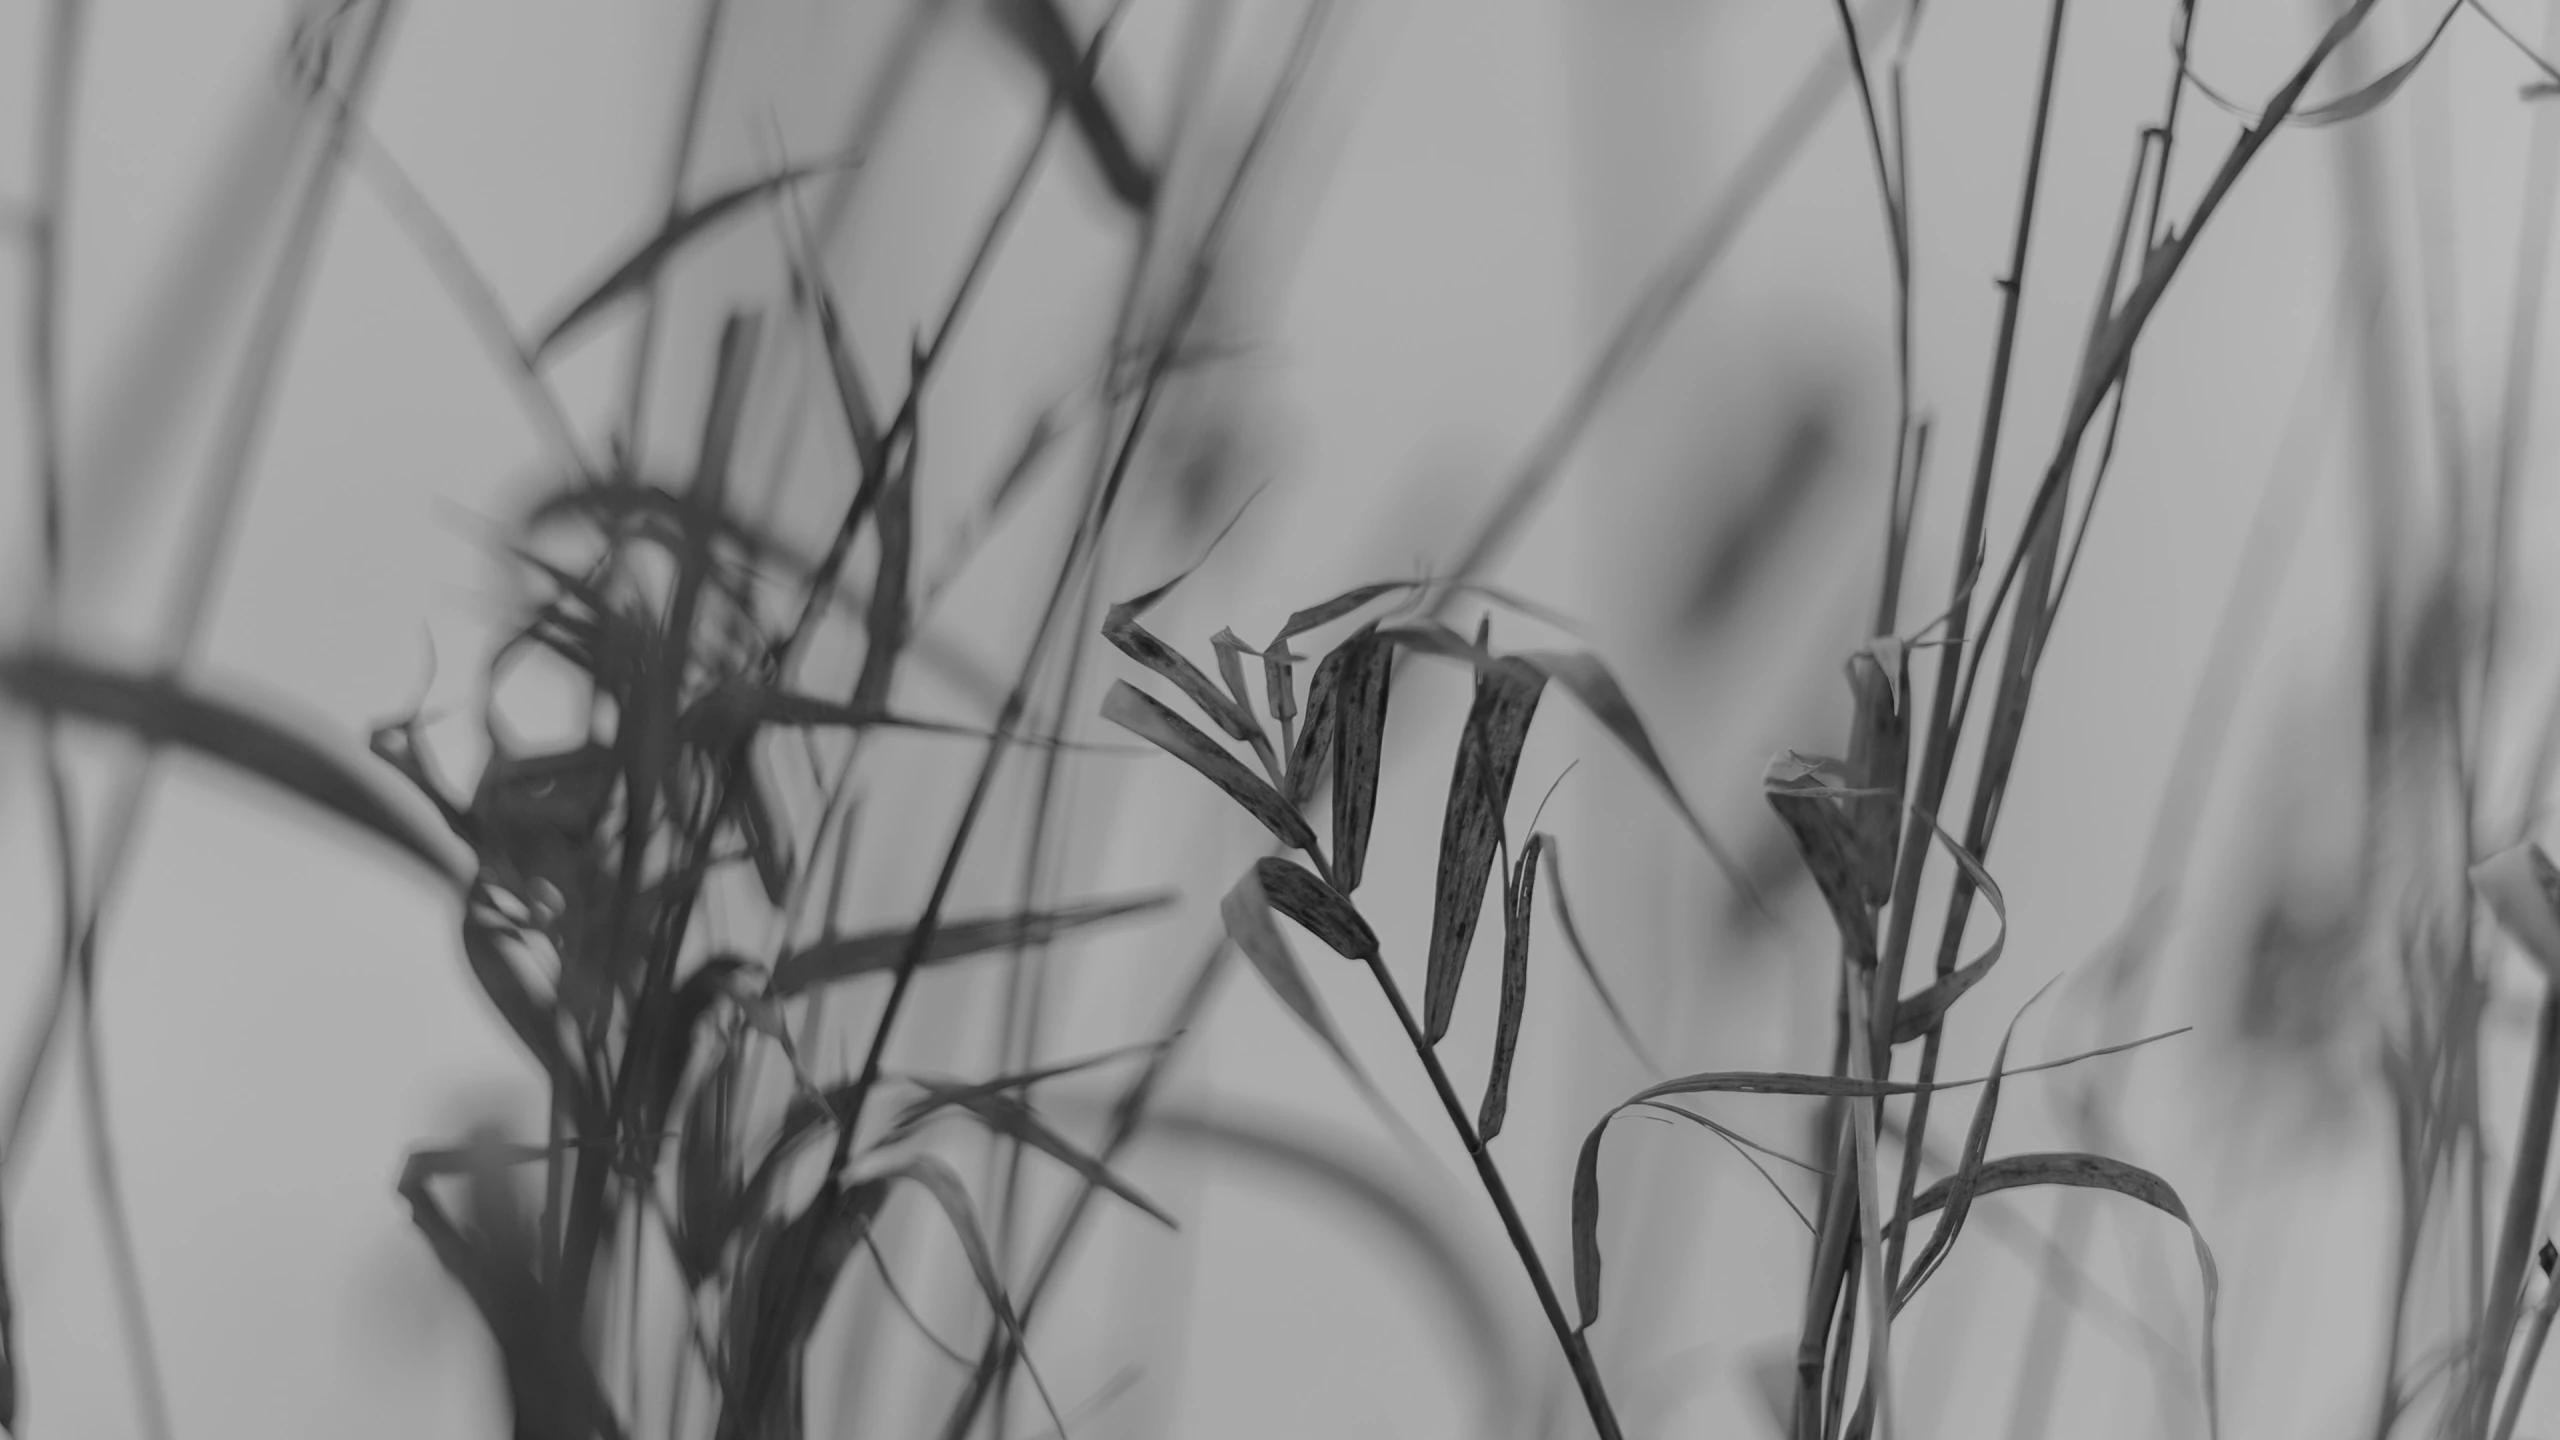 a close up image of grass with a gray background